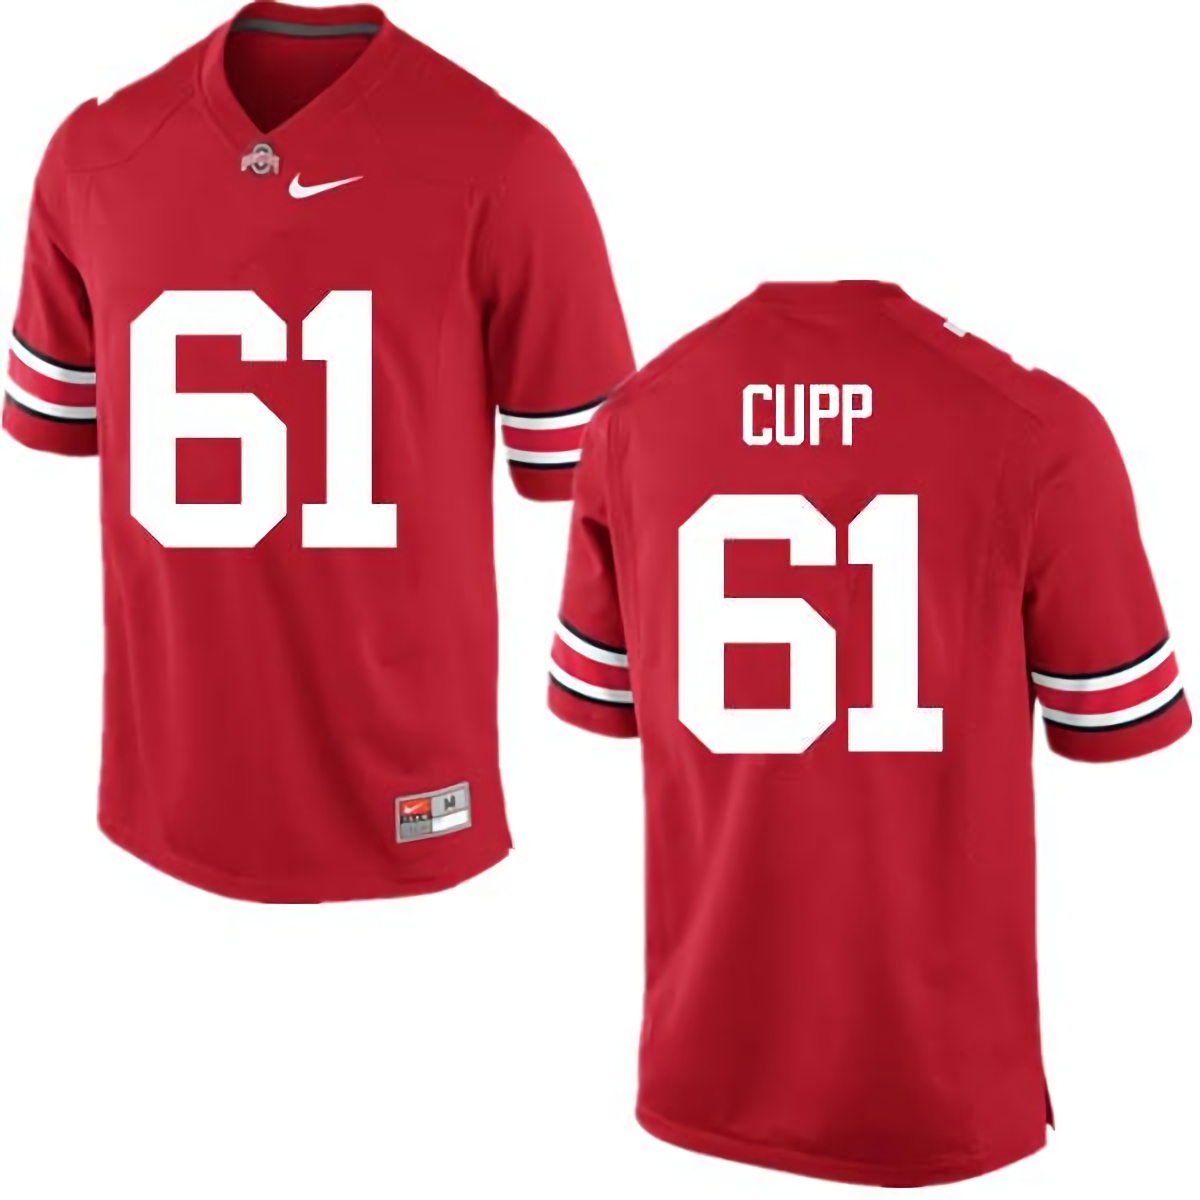 Gavin Cupp Ohio State Buckeyes Men's NCAA #61 Nike Red College Stitched Football Jersey UHG0356MQ